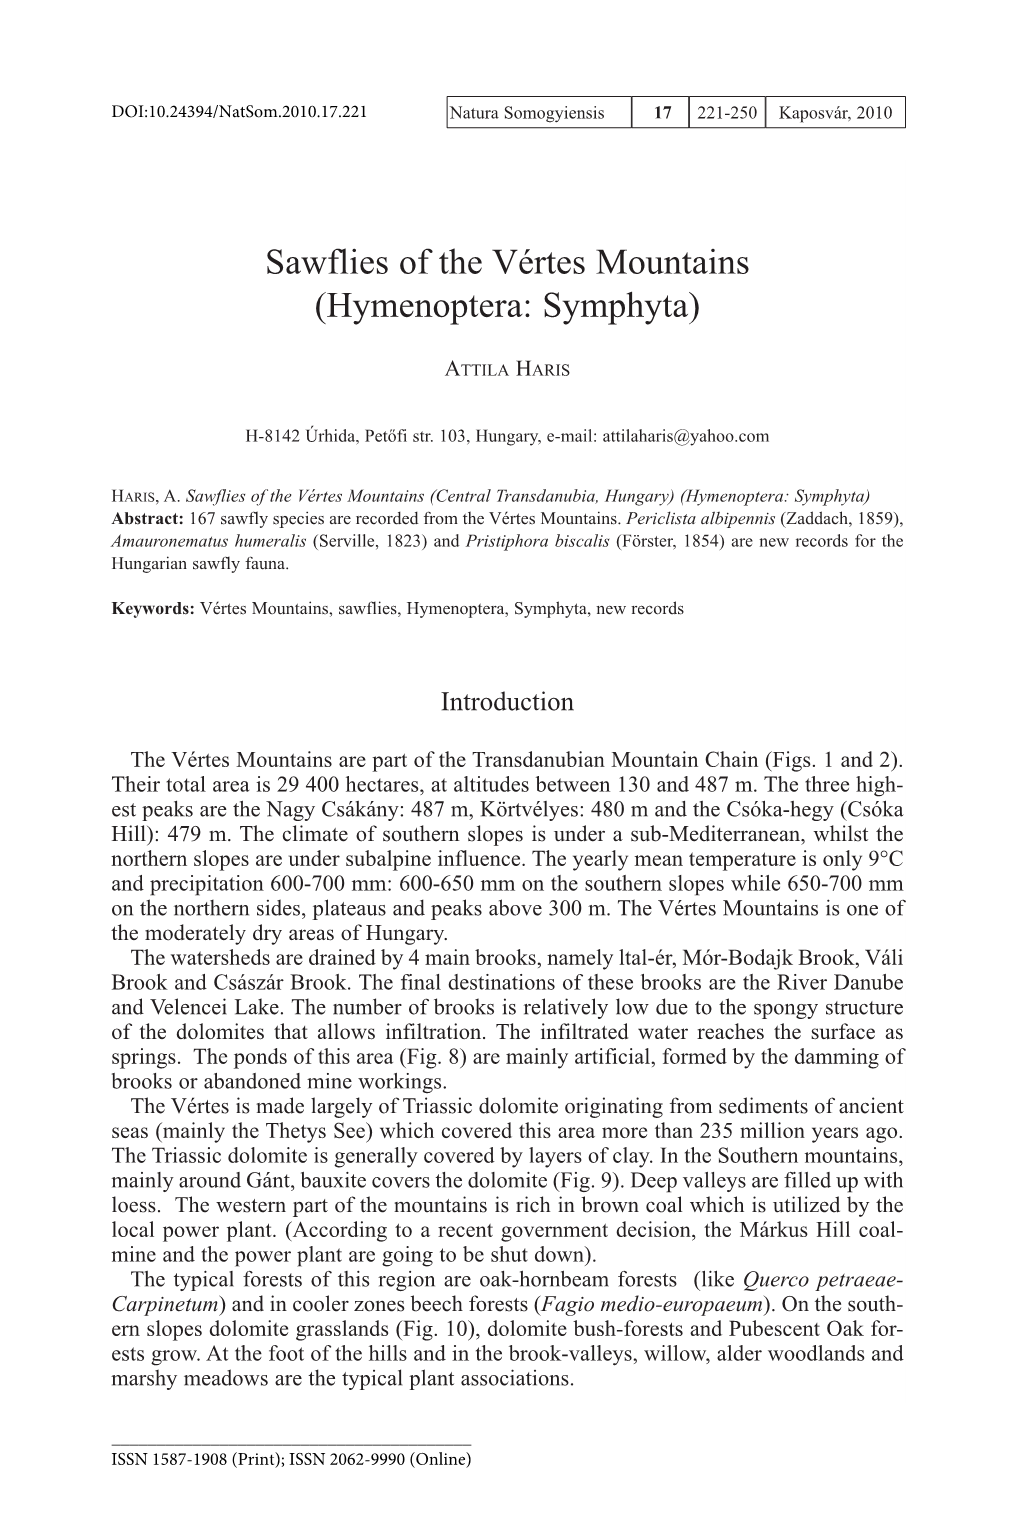 Sawflies of the Vértes Mountains (Hymenoptera: Symphyta)